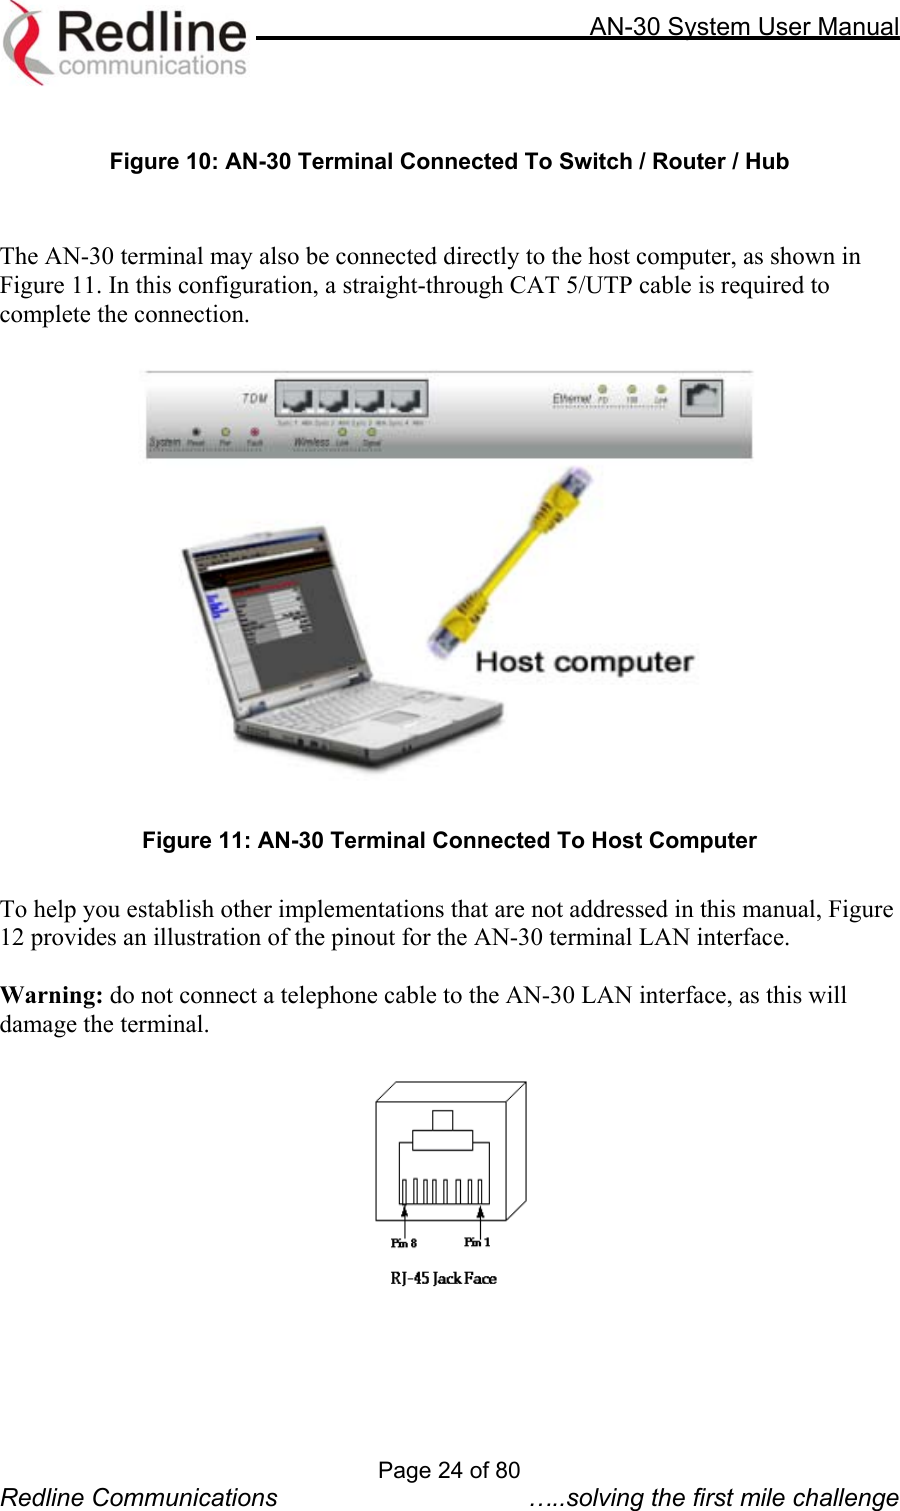     AN-30 System User Manual   Figure 10: AN-30 Terminal Connected To Switch / Router / Hub   The AN-30 terminal may also be connected directly to the host computer, as shown in Figure 11. In this configuration, a straight-through CAT 5/UTP cable is required to complete the connection.      Figure 11: AN-30 Terminal Connected To Host Computer  To help you establish other implementations that are not addressed in this manual, Figure 12 provides an illustration of the pinout for the AN-30 terminal LAN interface.    Warning: do not connect a telephone cable to the AN-30 LAN interface, as this will damage the terminal.    Page 24 of 80 Redline Communications  …..solving the first mile challenge 